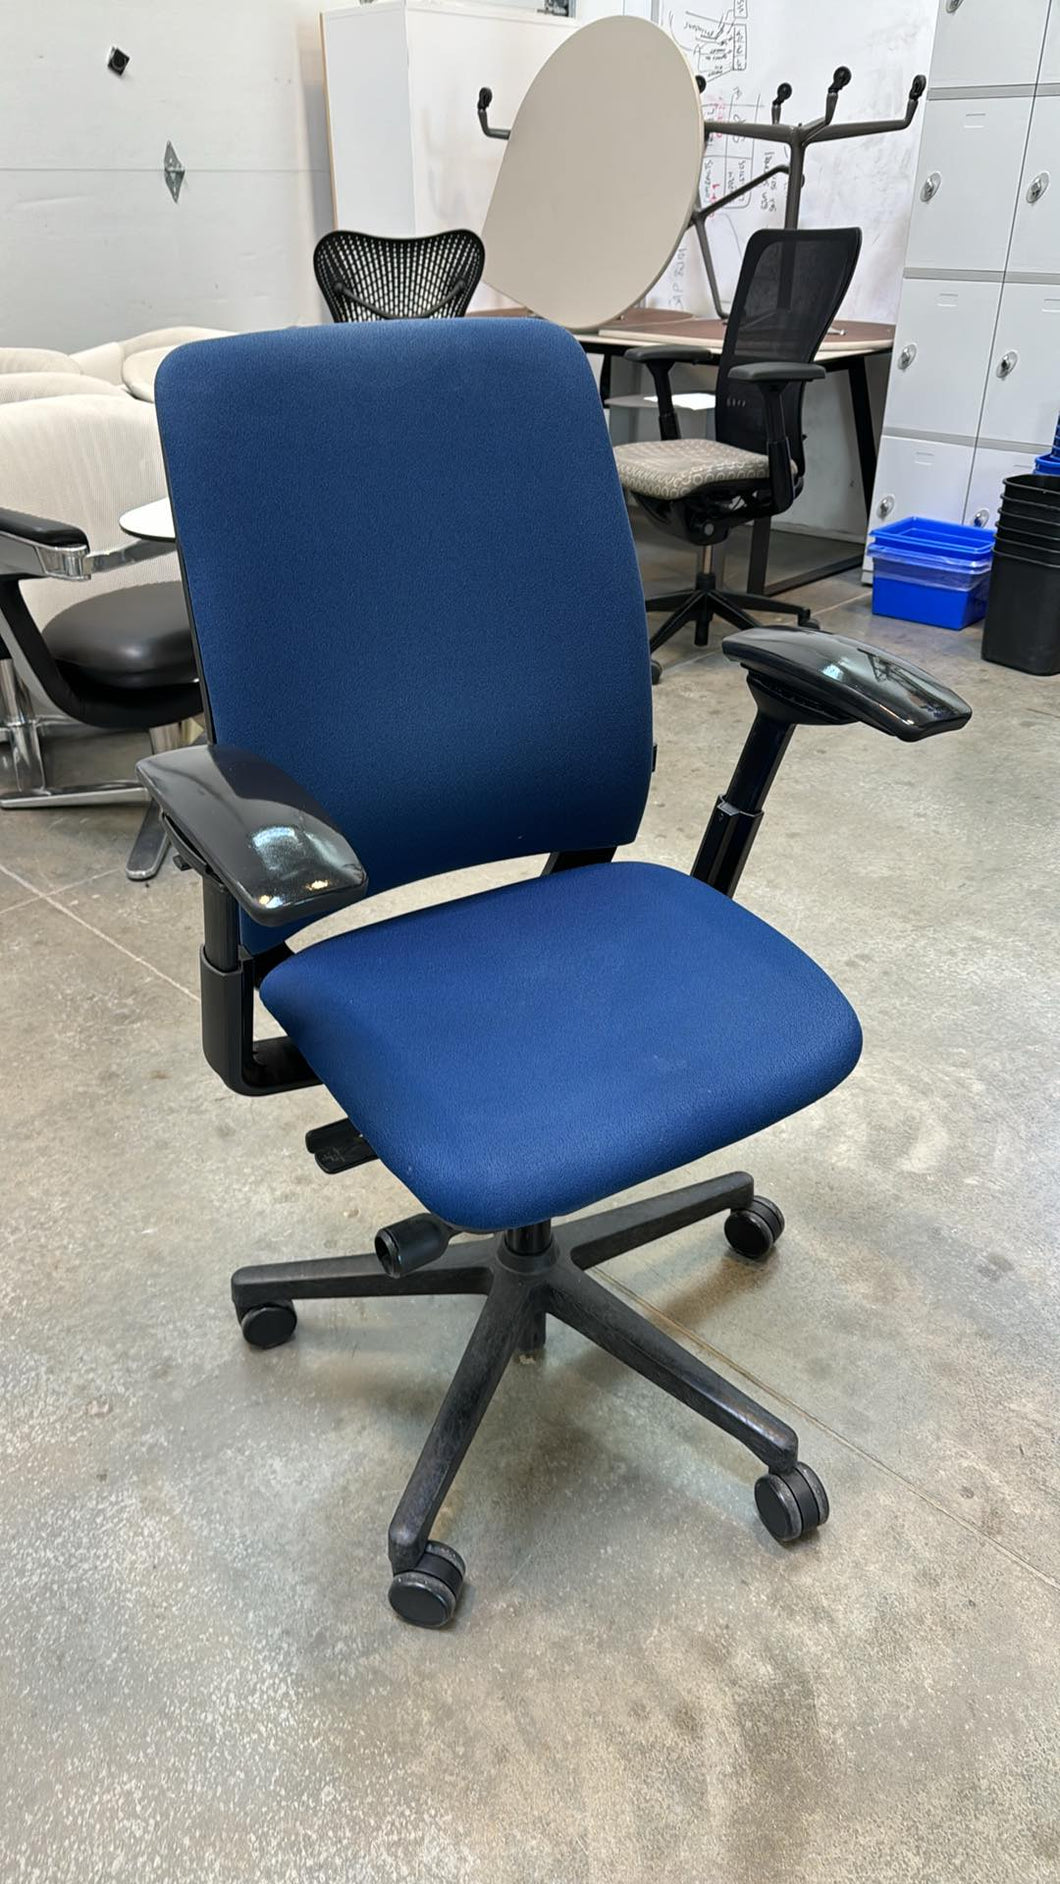 Used Steelcase Amia Chair - Fully Loaded